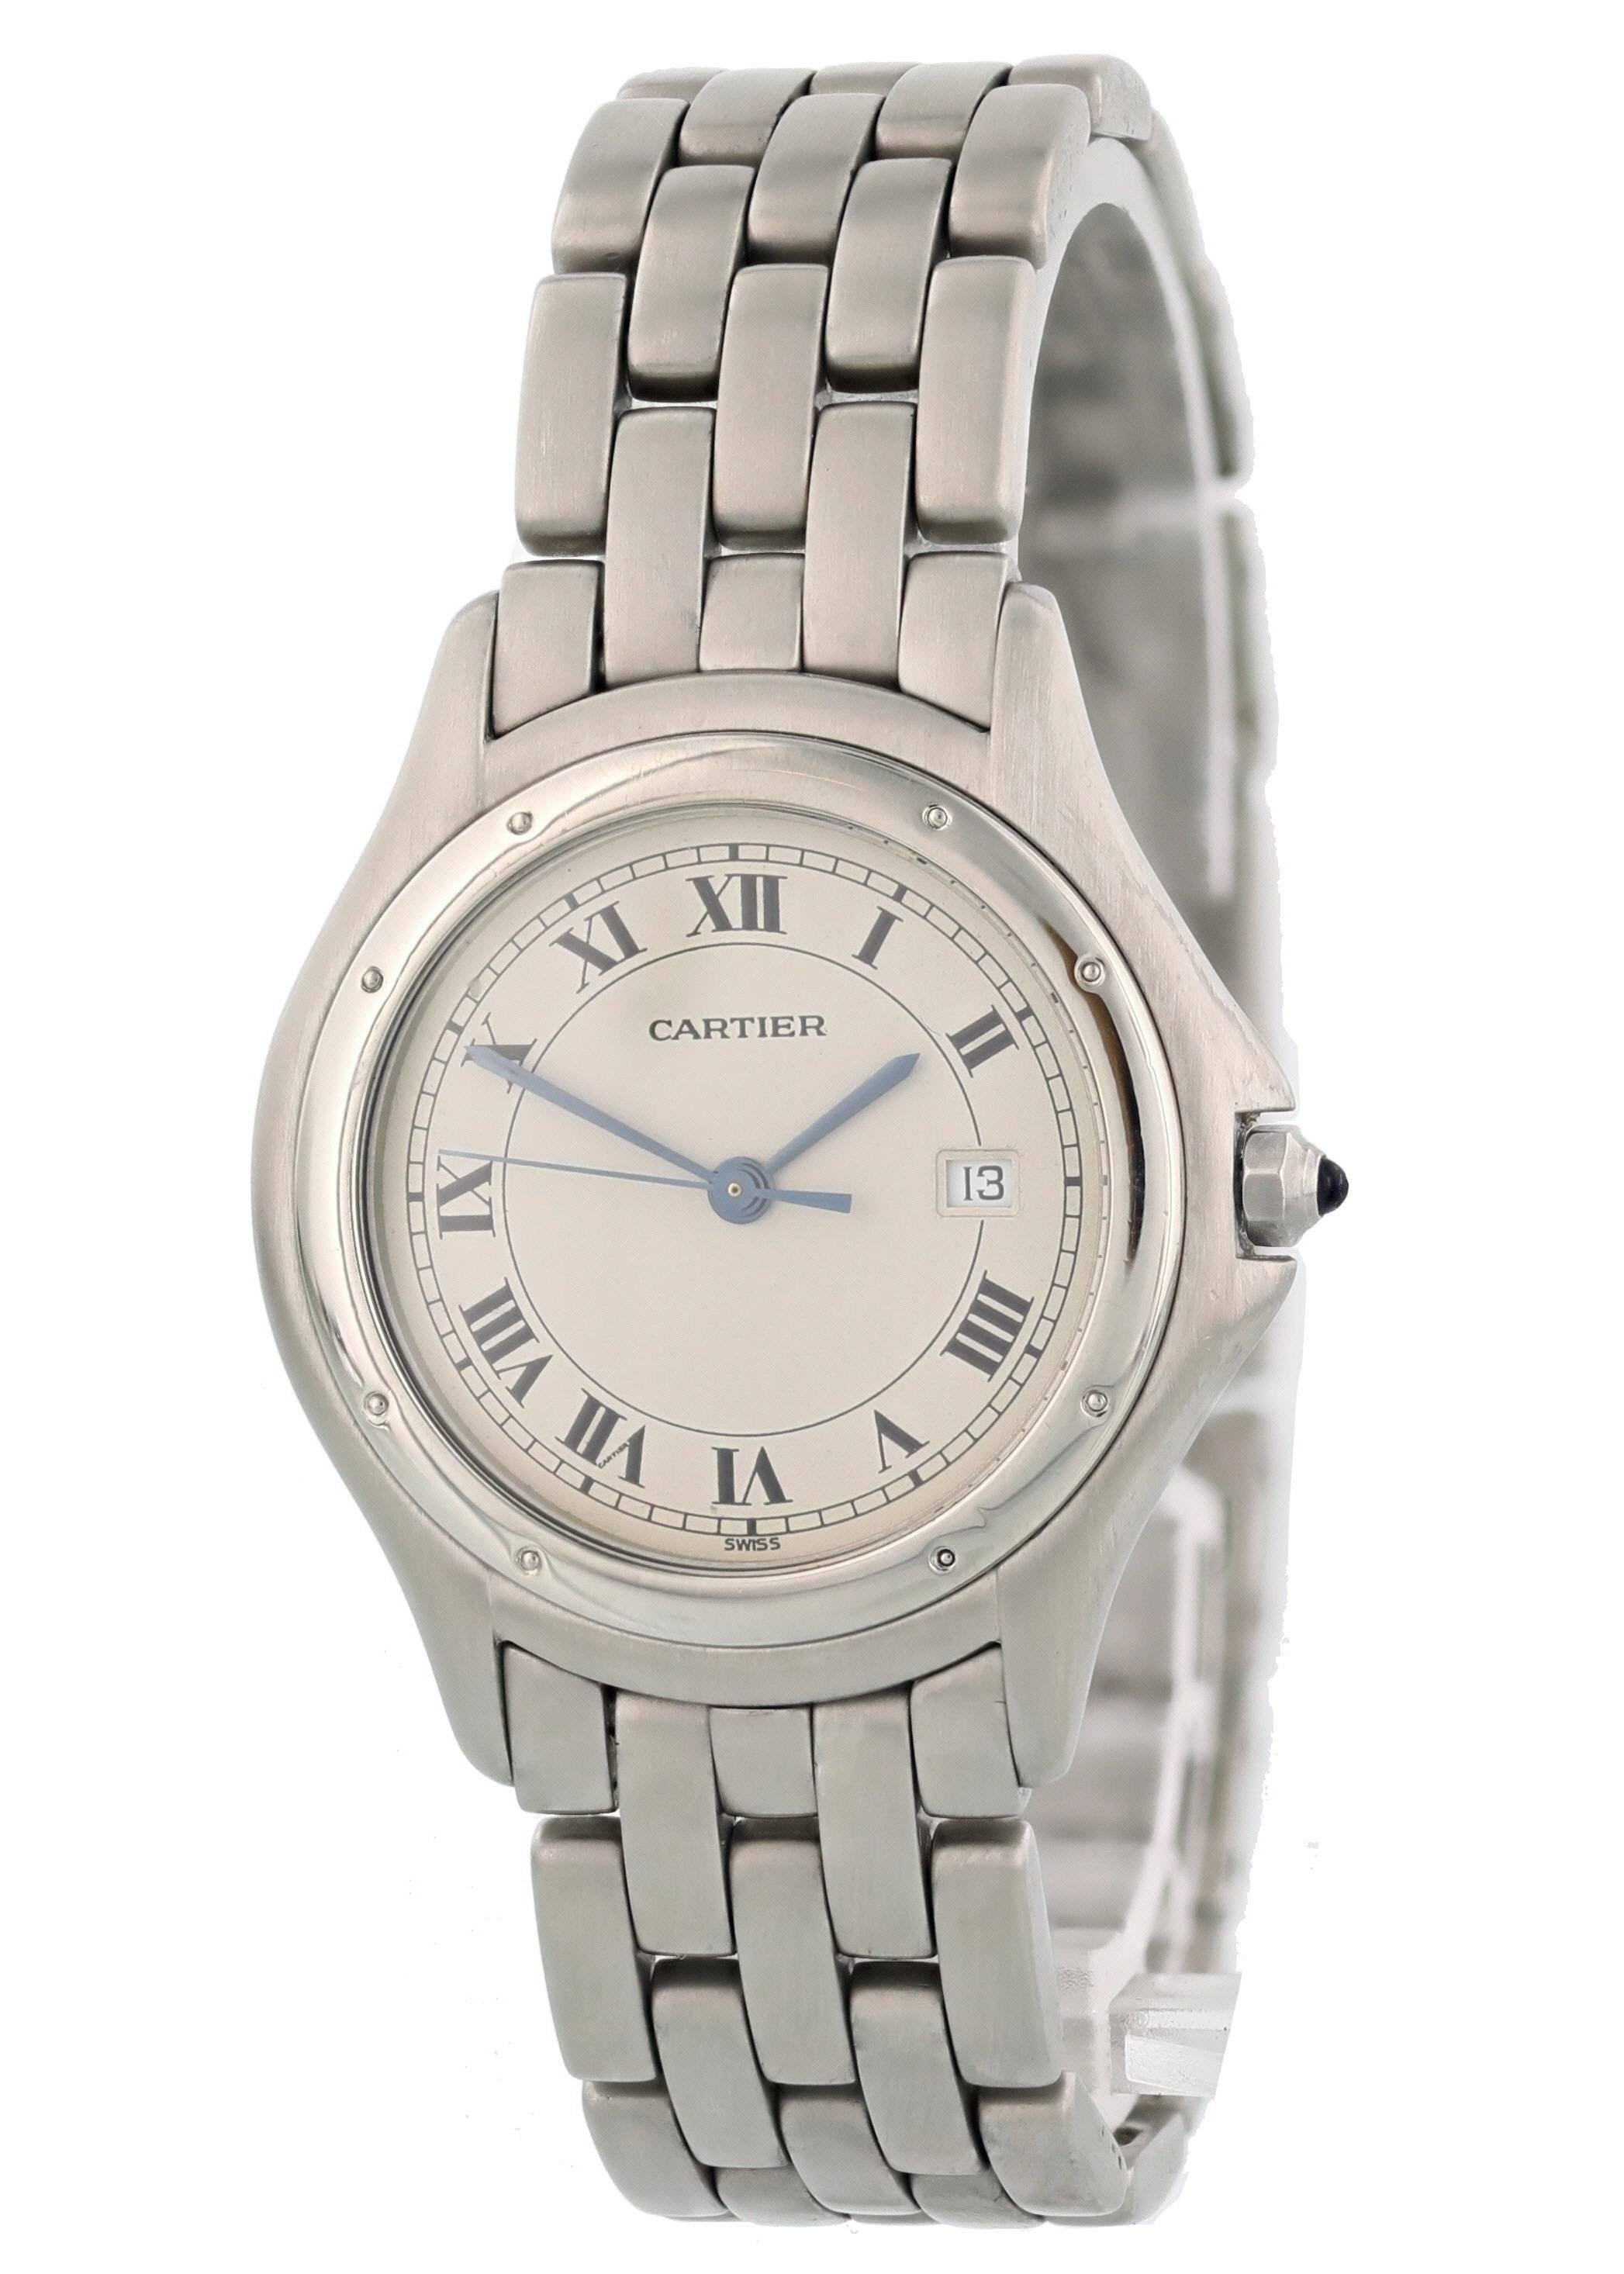 Cartier Panthere Stainless Steel. 34mm stainless steel case. Stainless steel bezel. Off-white dial with blue steel hands and black Roman numeral markers. Date display at the 3 o'clock position. Stainless steel bracelet with stainless steel hidden